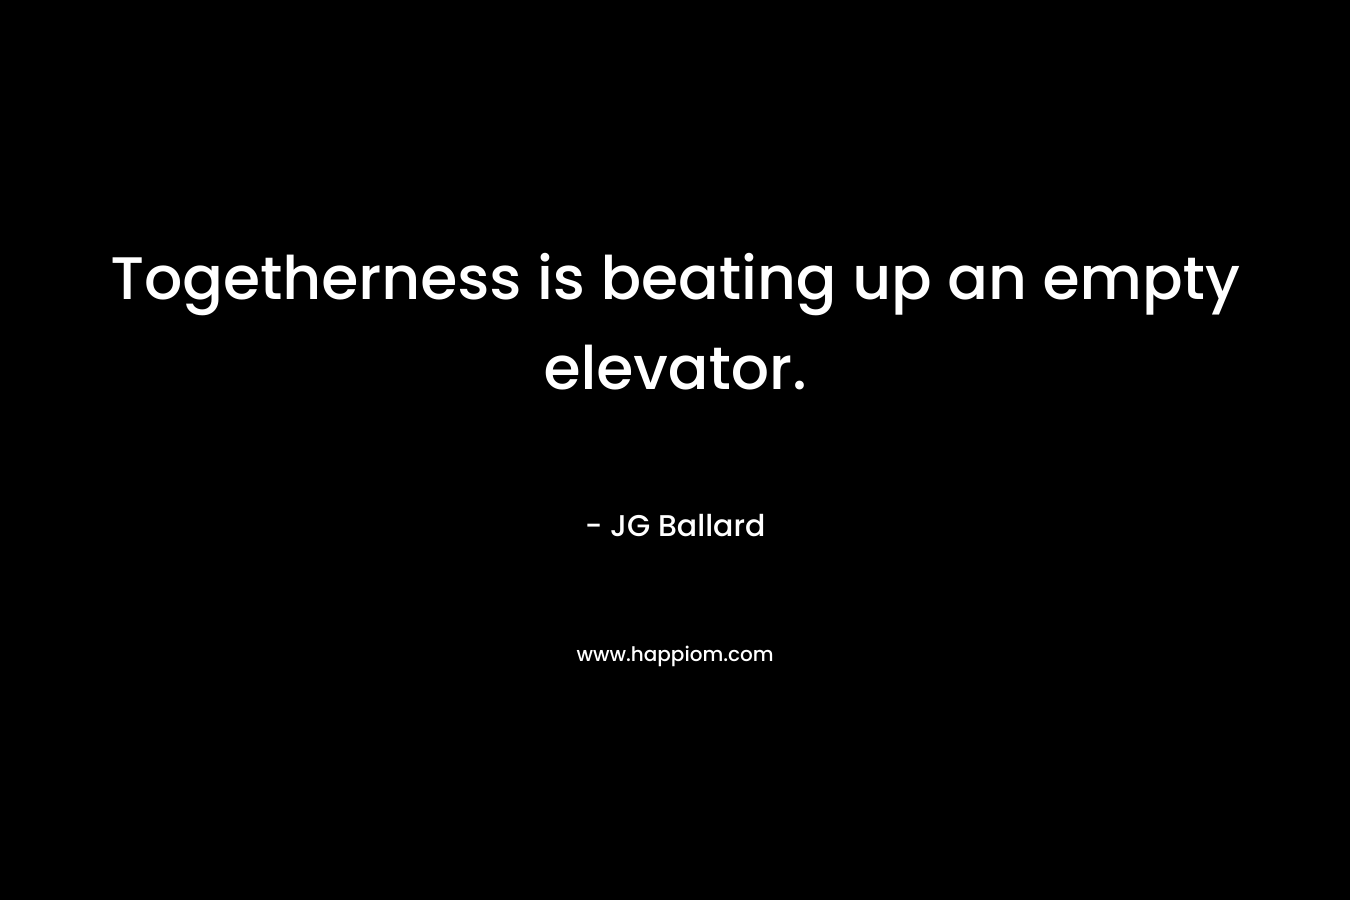 Togetherness is beating up an empty elevator.